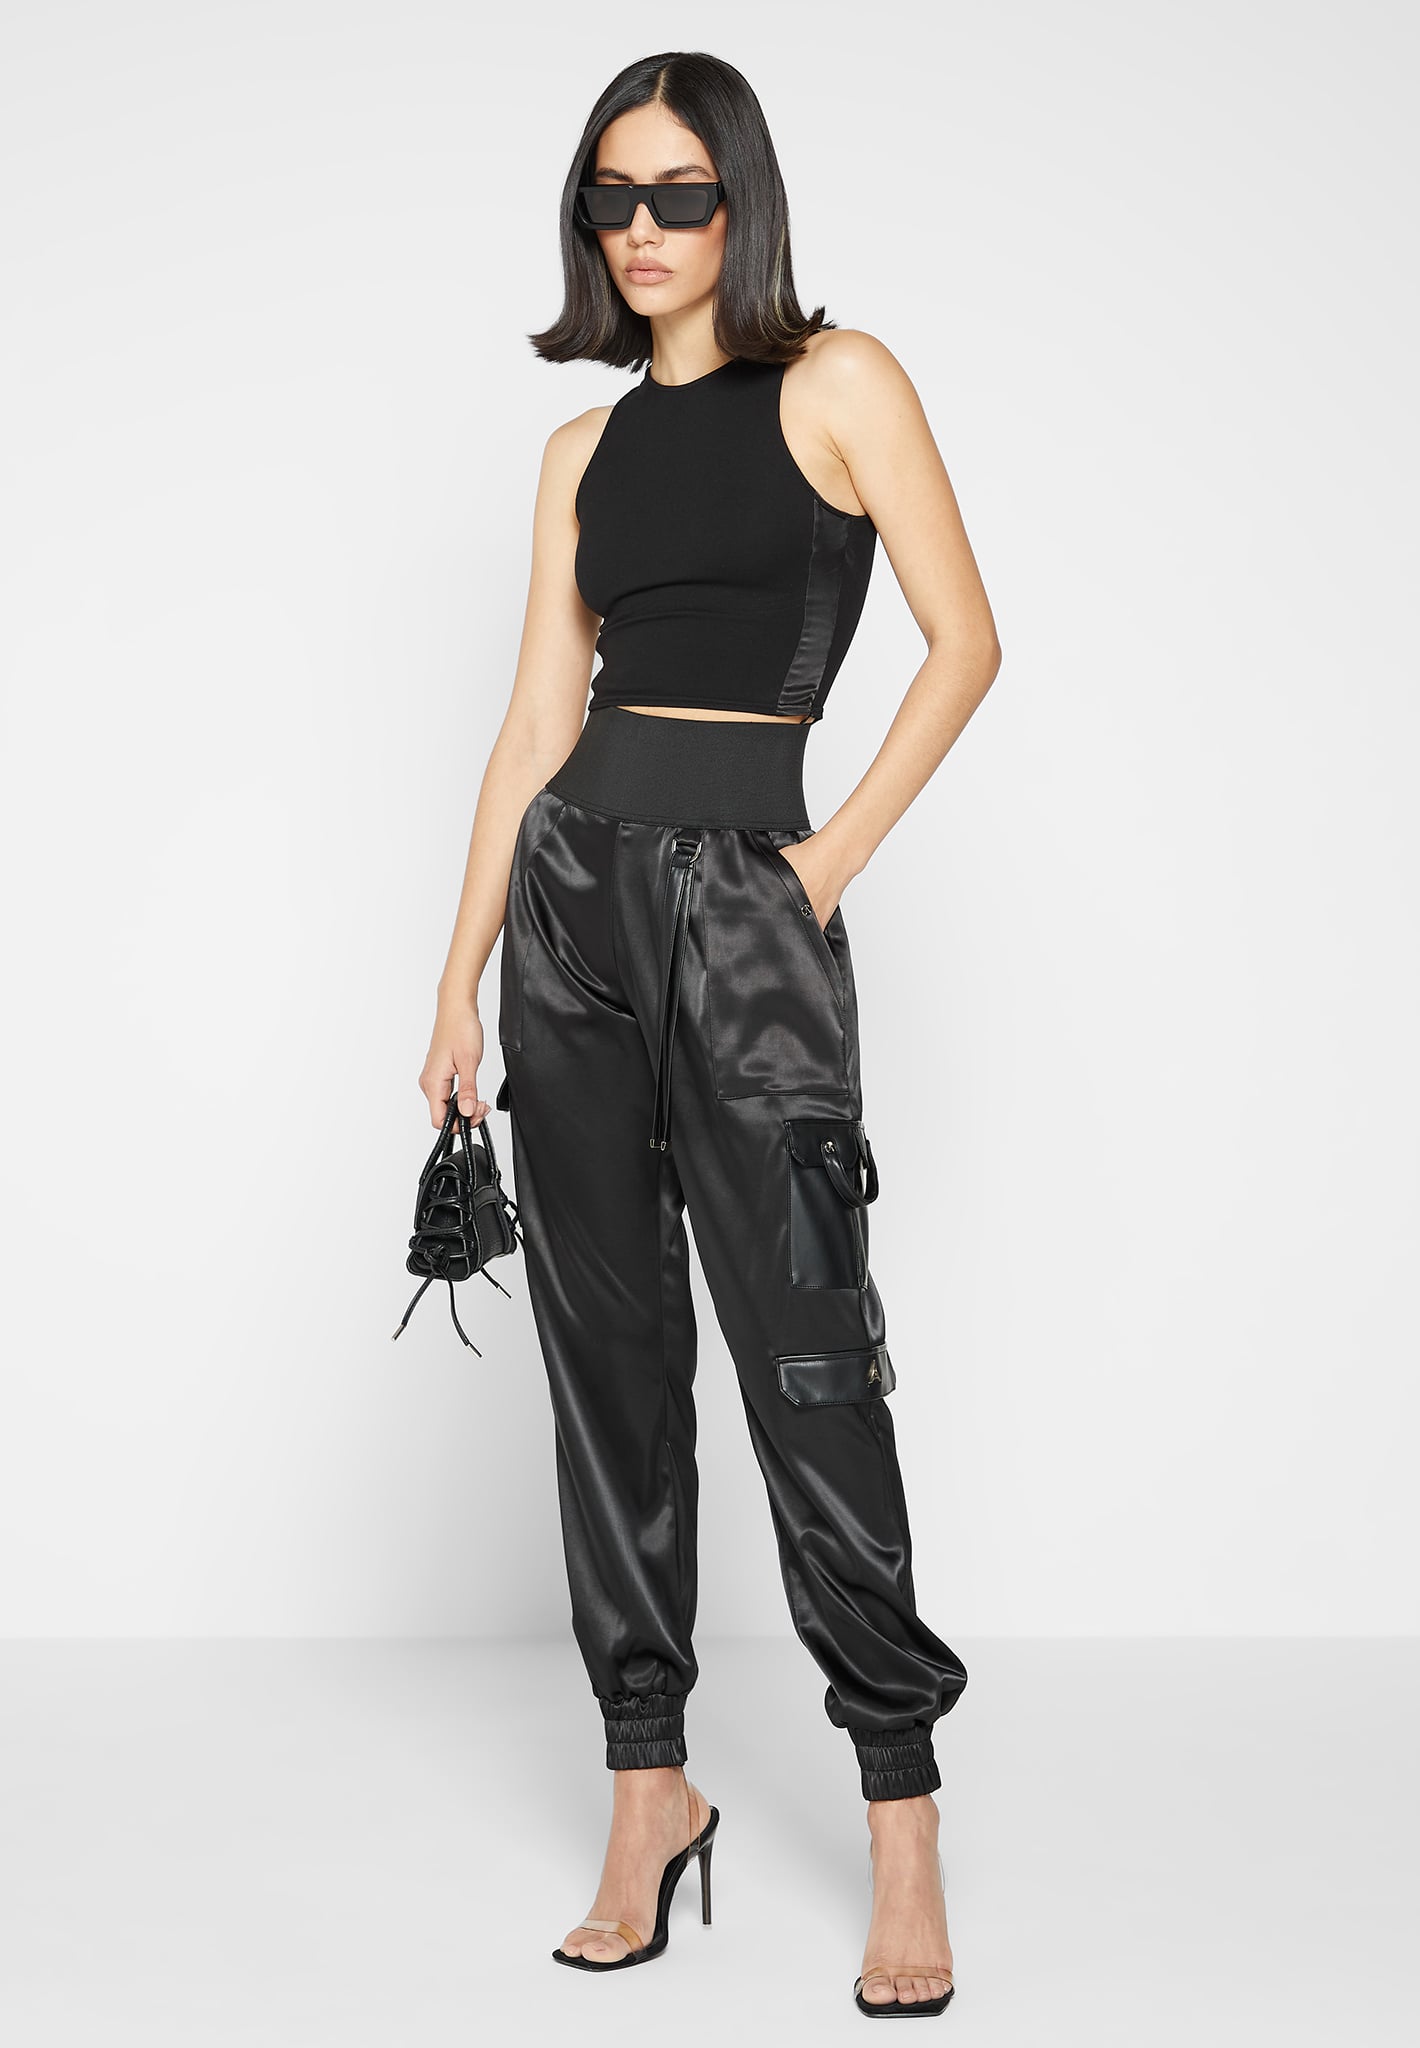 Casual Cargo Pants for Women High Rise Silky Satin Cargo Pant for Daily  Wear Holiday Shopping Vacation S Black